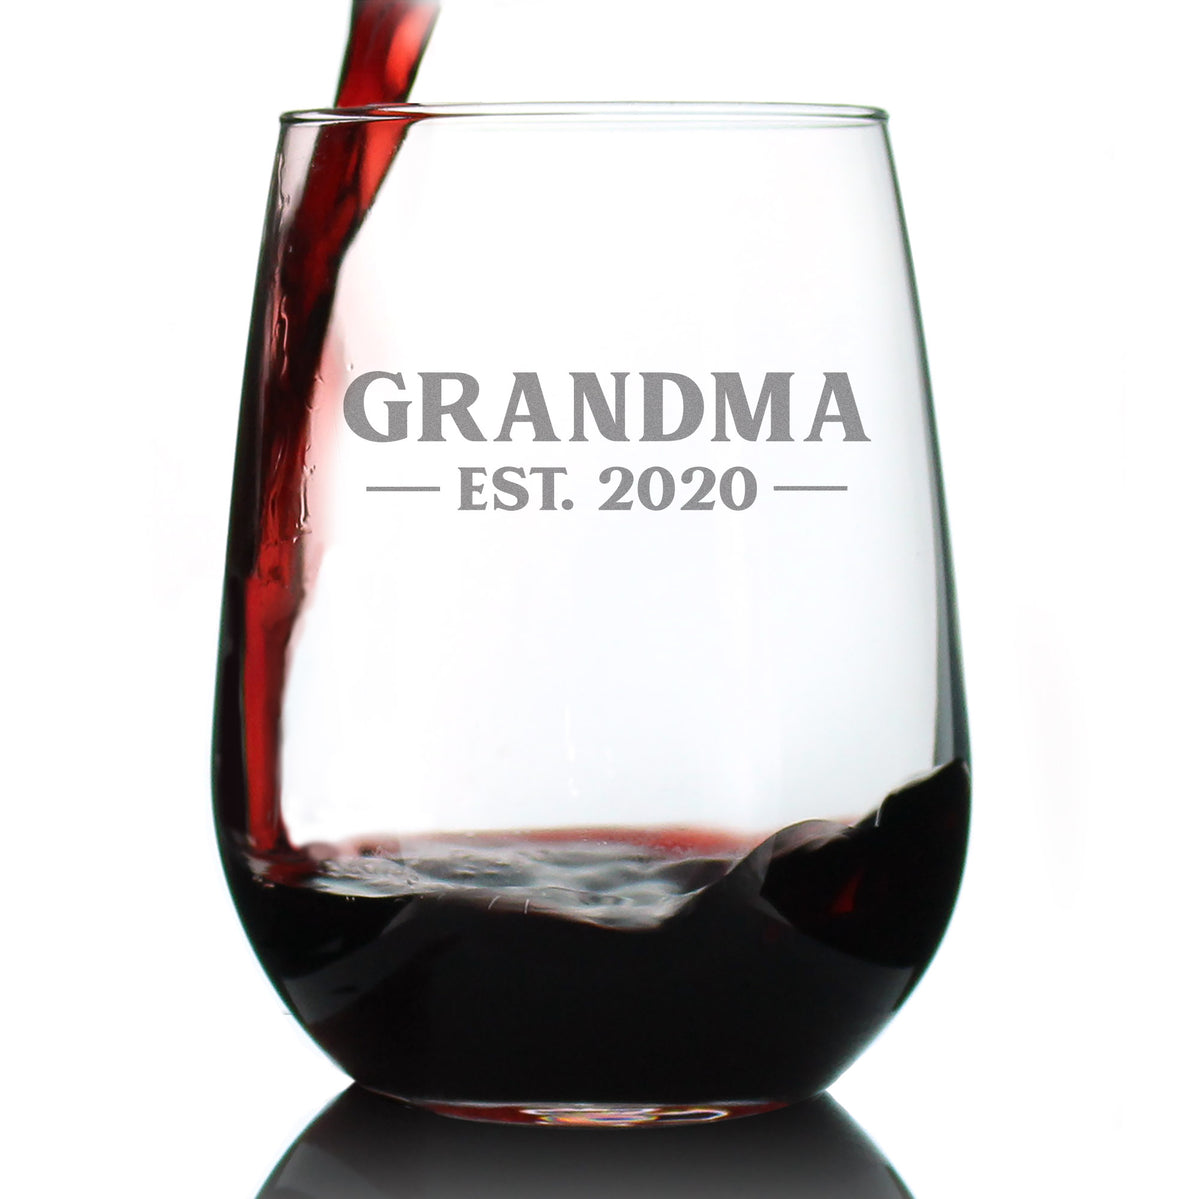 Grandma Est 2020 - New Grandmother Stemless Wine Glass Gift for First Time Grandparents - Bold 17 Oz Large Glasses